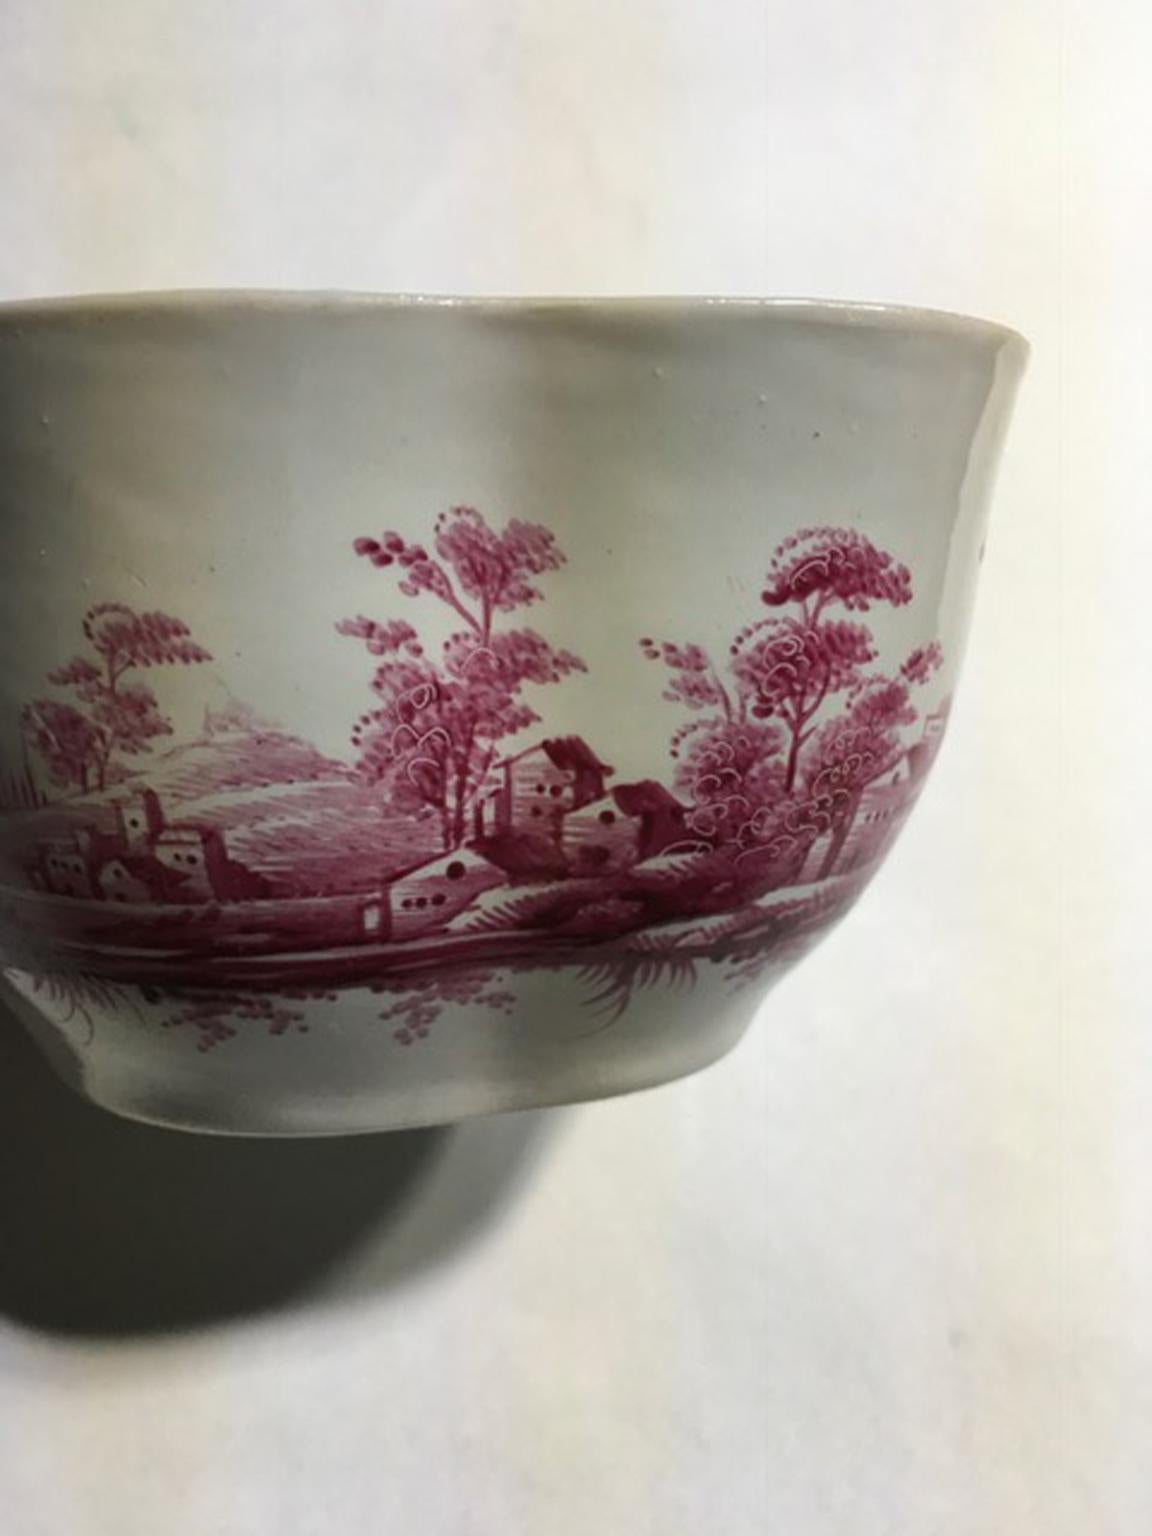 Italy Richard Ginori Mid-18th Century Porcelain Sugar Bowl Pink Landscapes For Sale 8